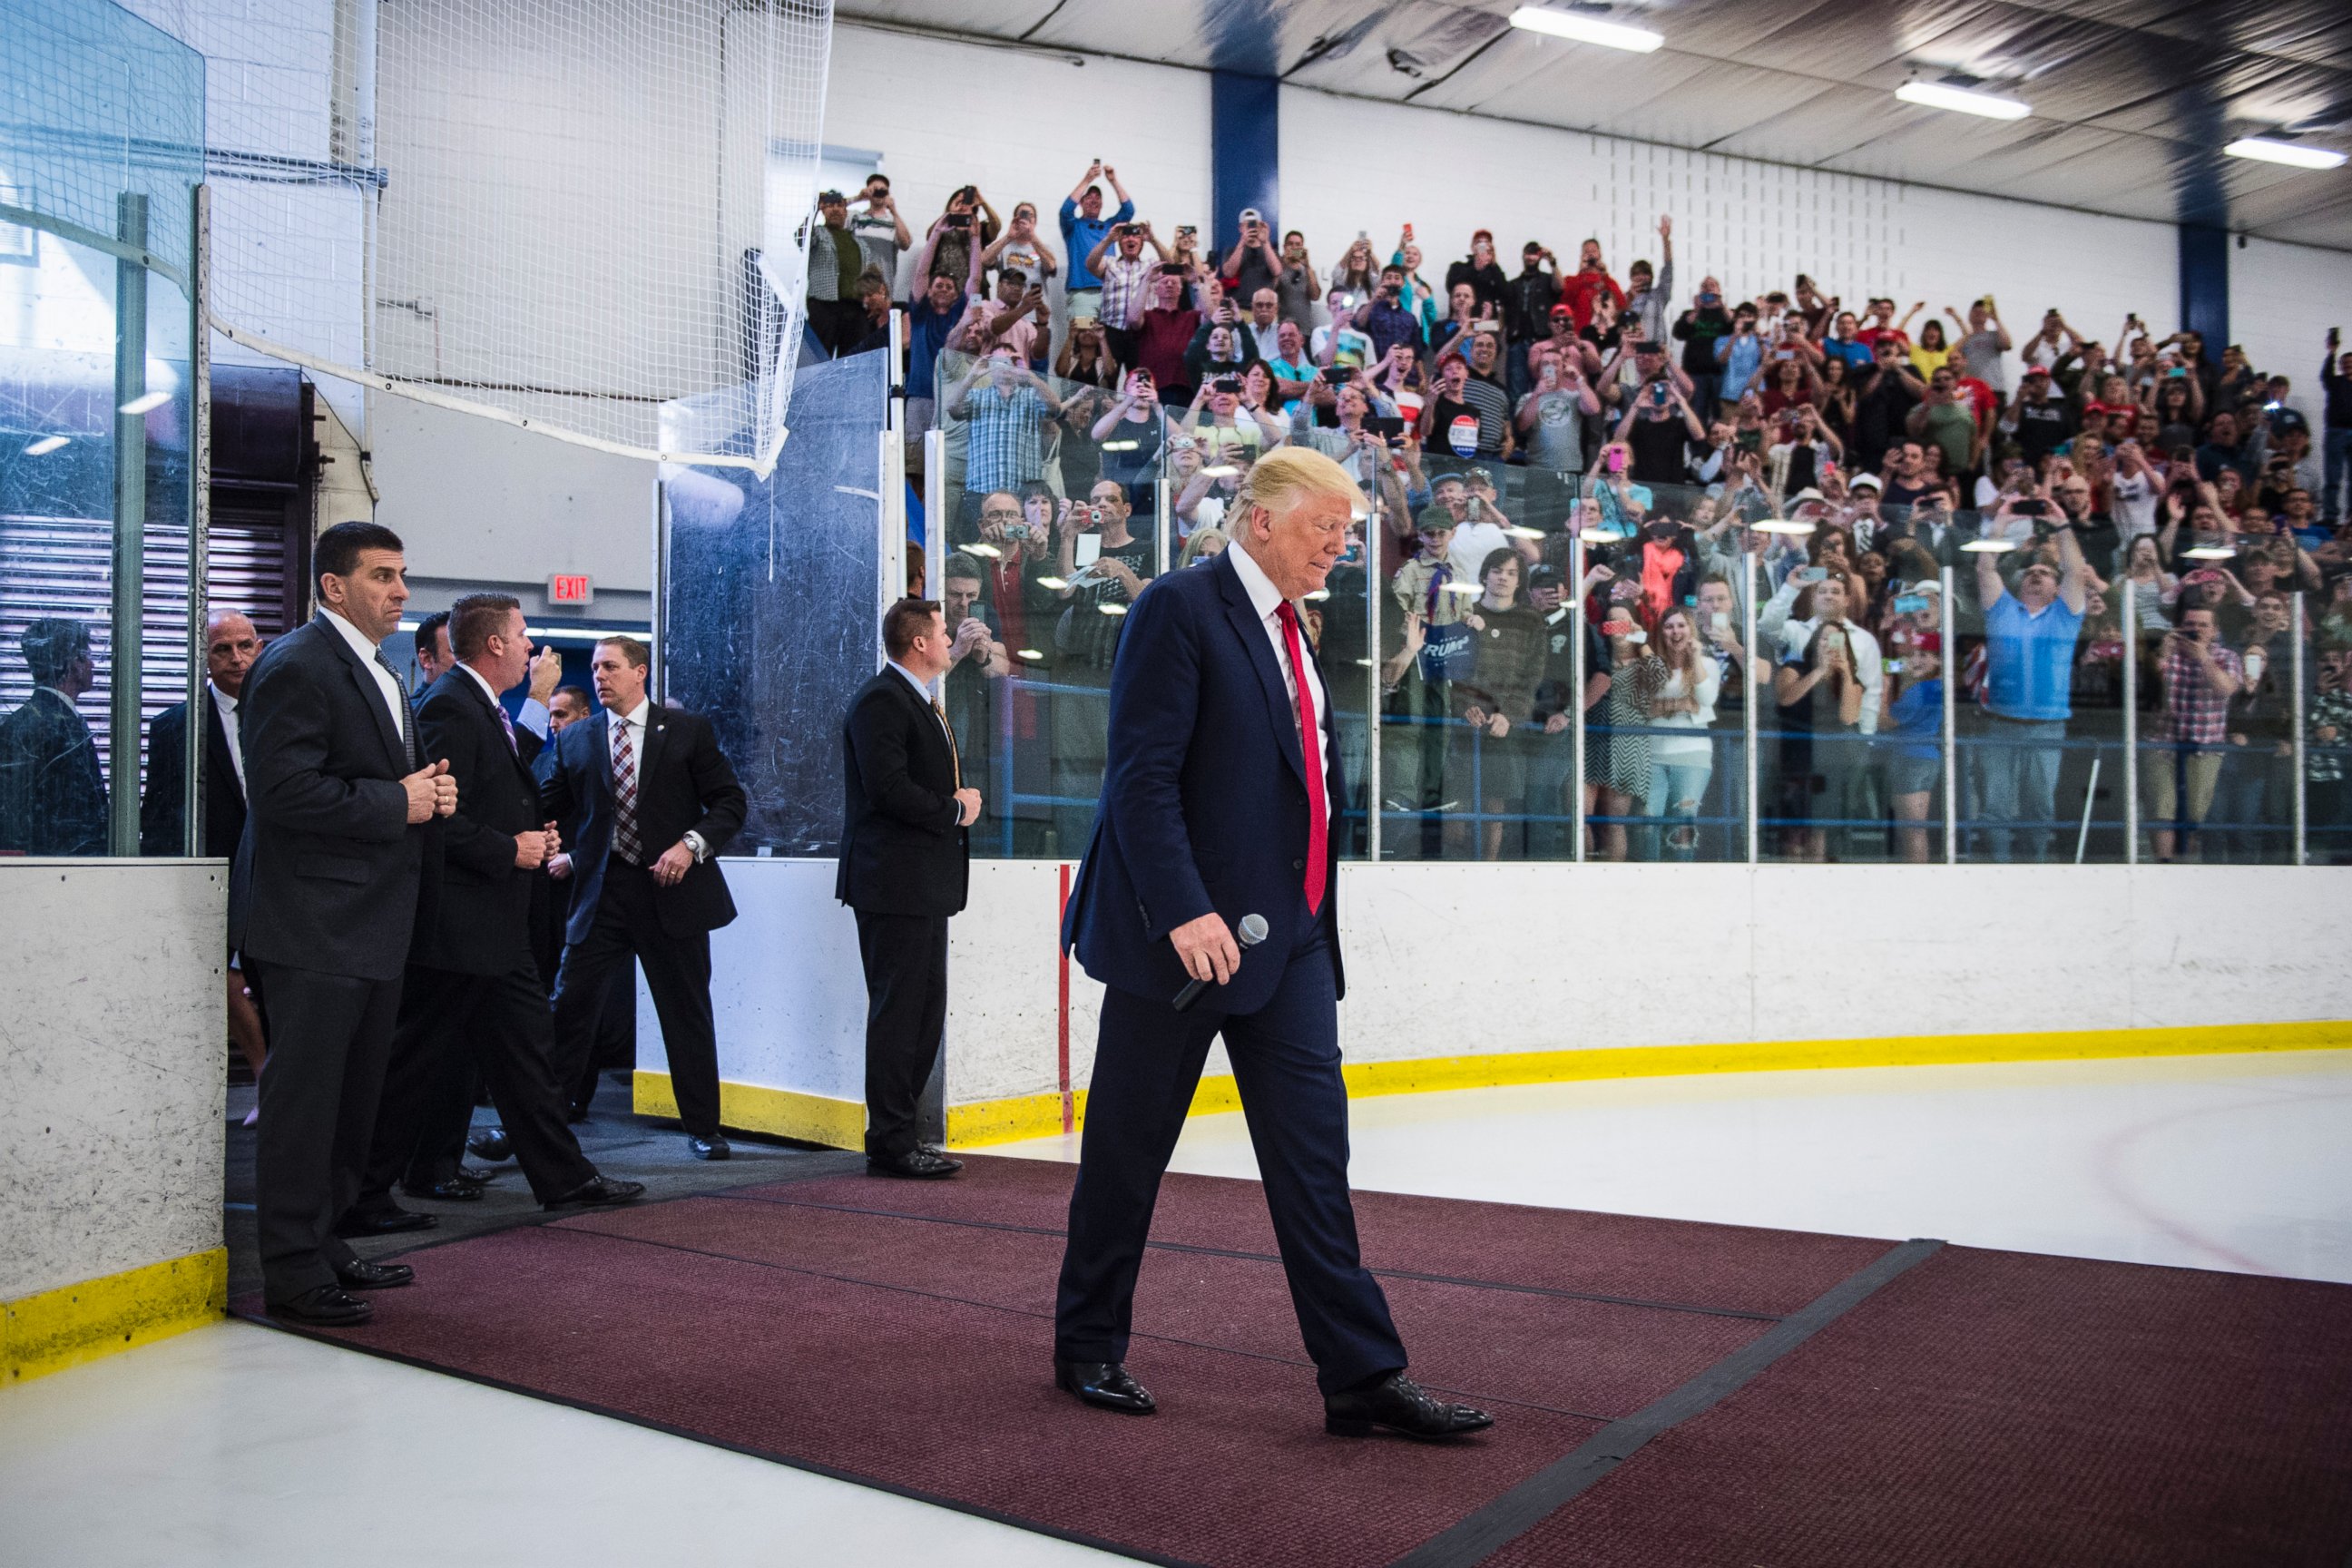 PHOTO: Presidential candidates Donald Trump walks out onto an ice rink to say a few words where an overflow crowd of supporters gathered to watch him speak during a campaign event at the Mid-Hudson Civic Center in Poughkeepsie, N.Y., April 17, 2016.